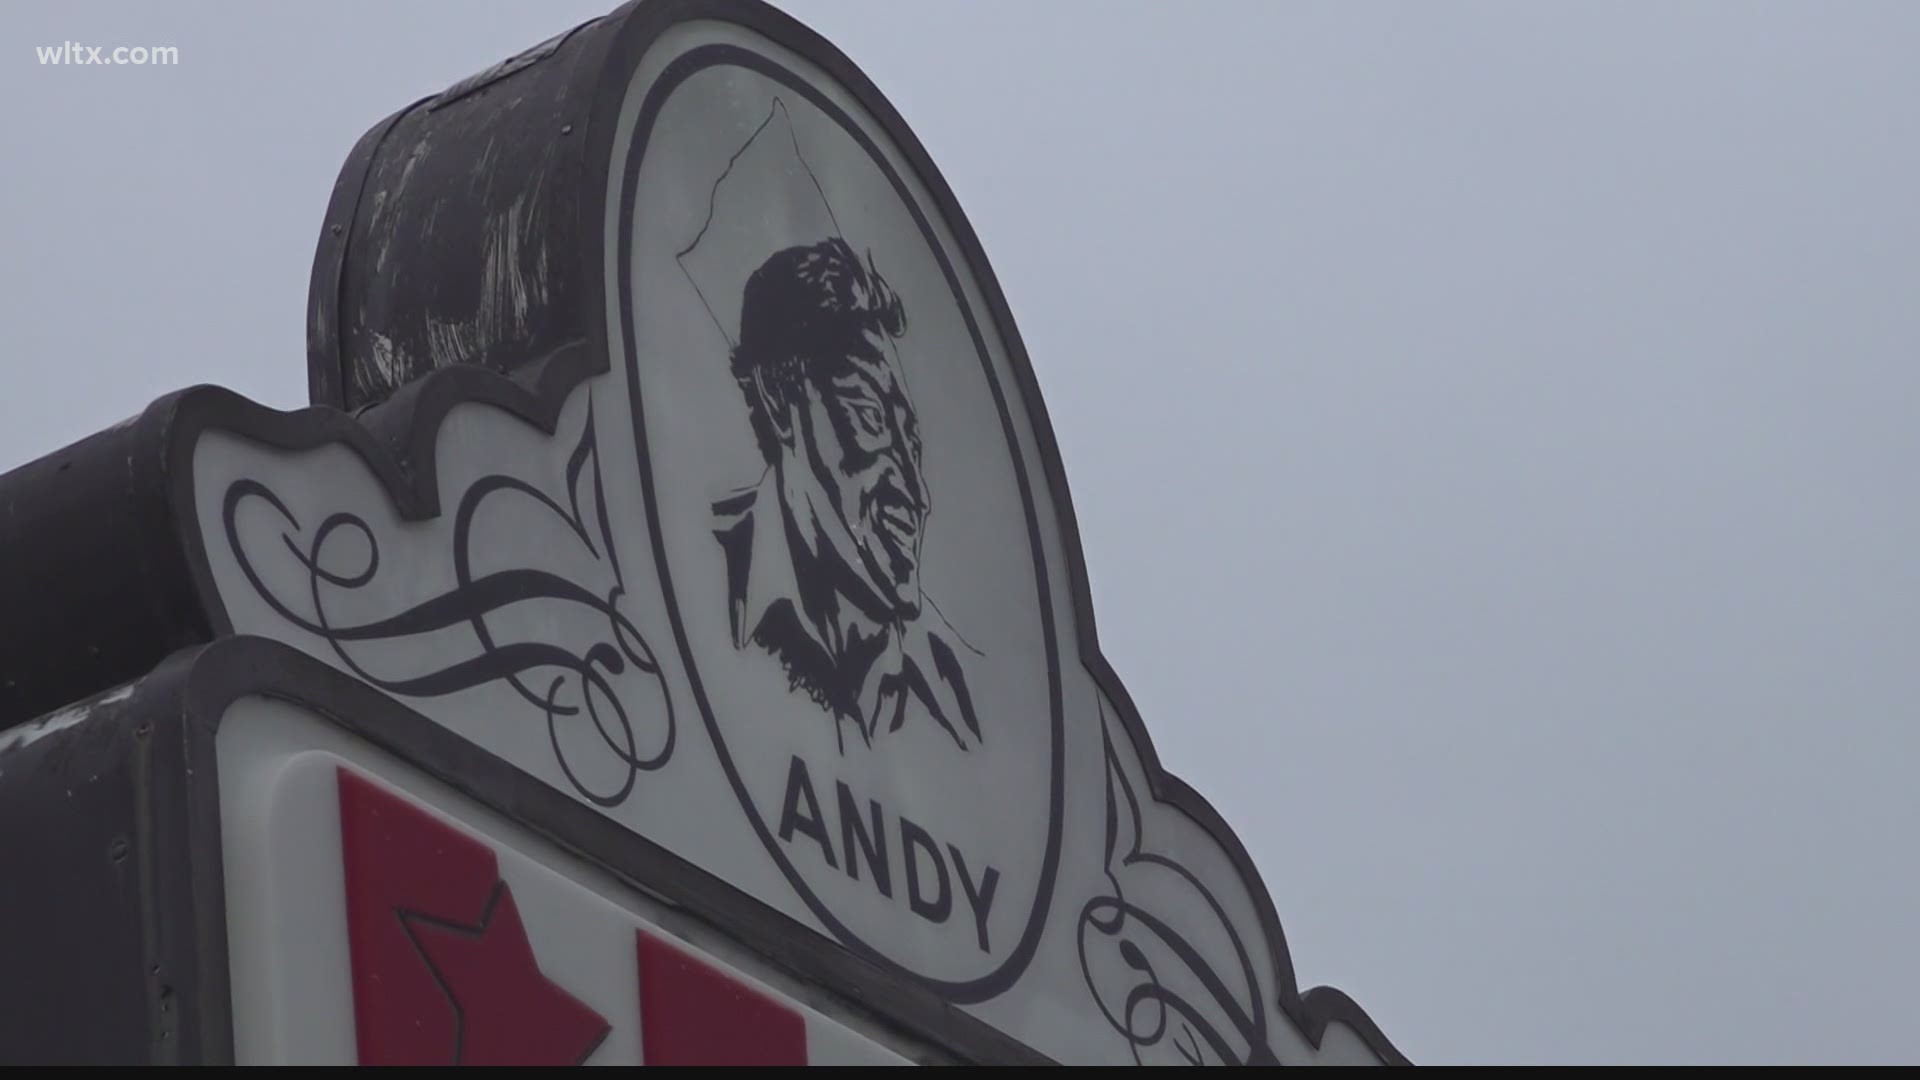 Andy of Andy's deli passed away Thursday, and is remembered as a beloved member of the community.